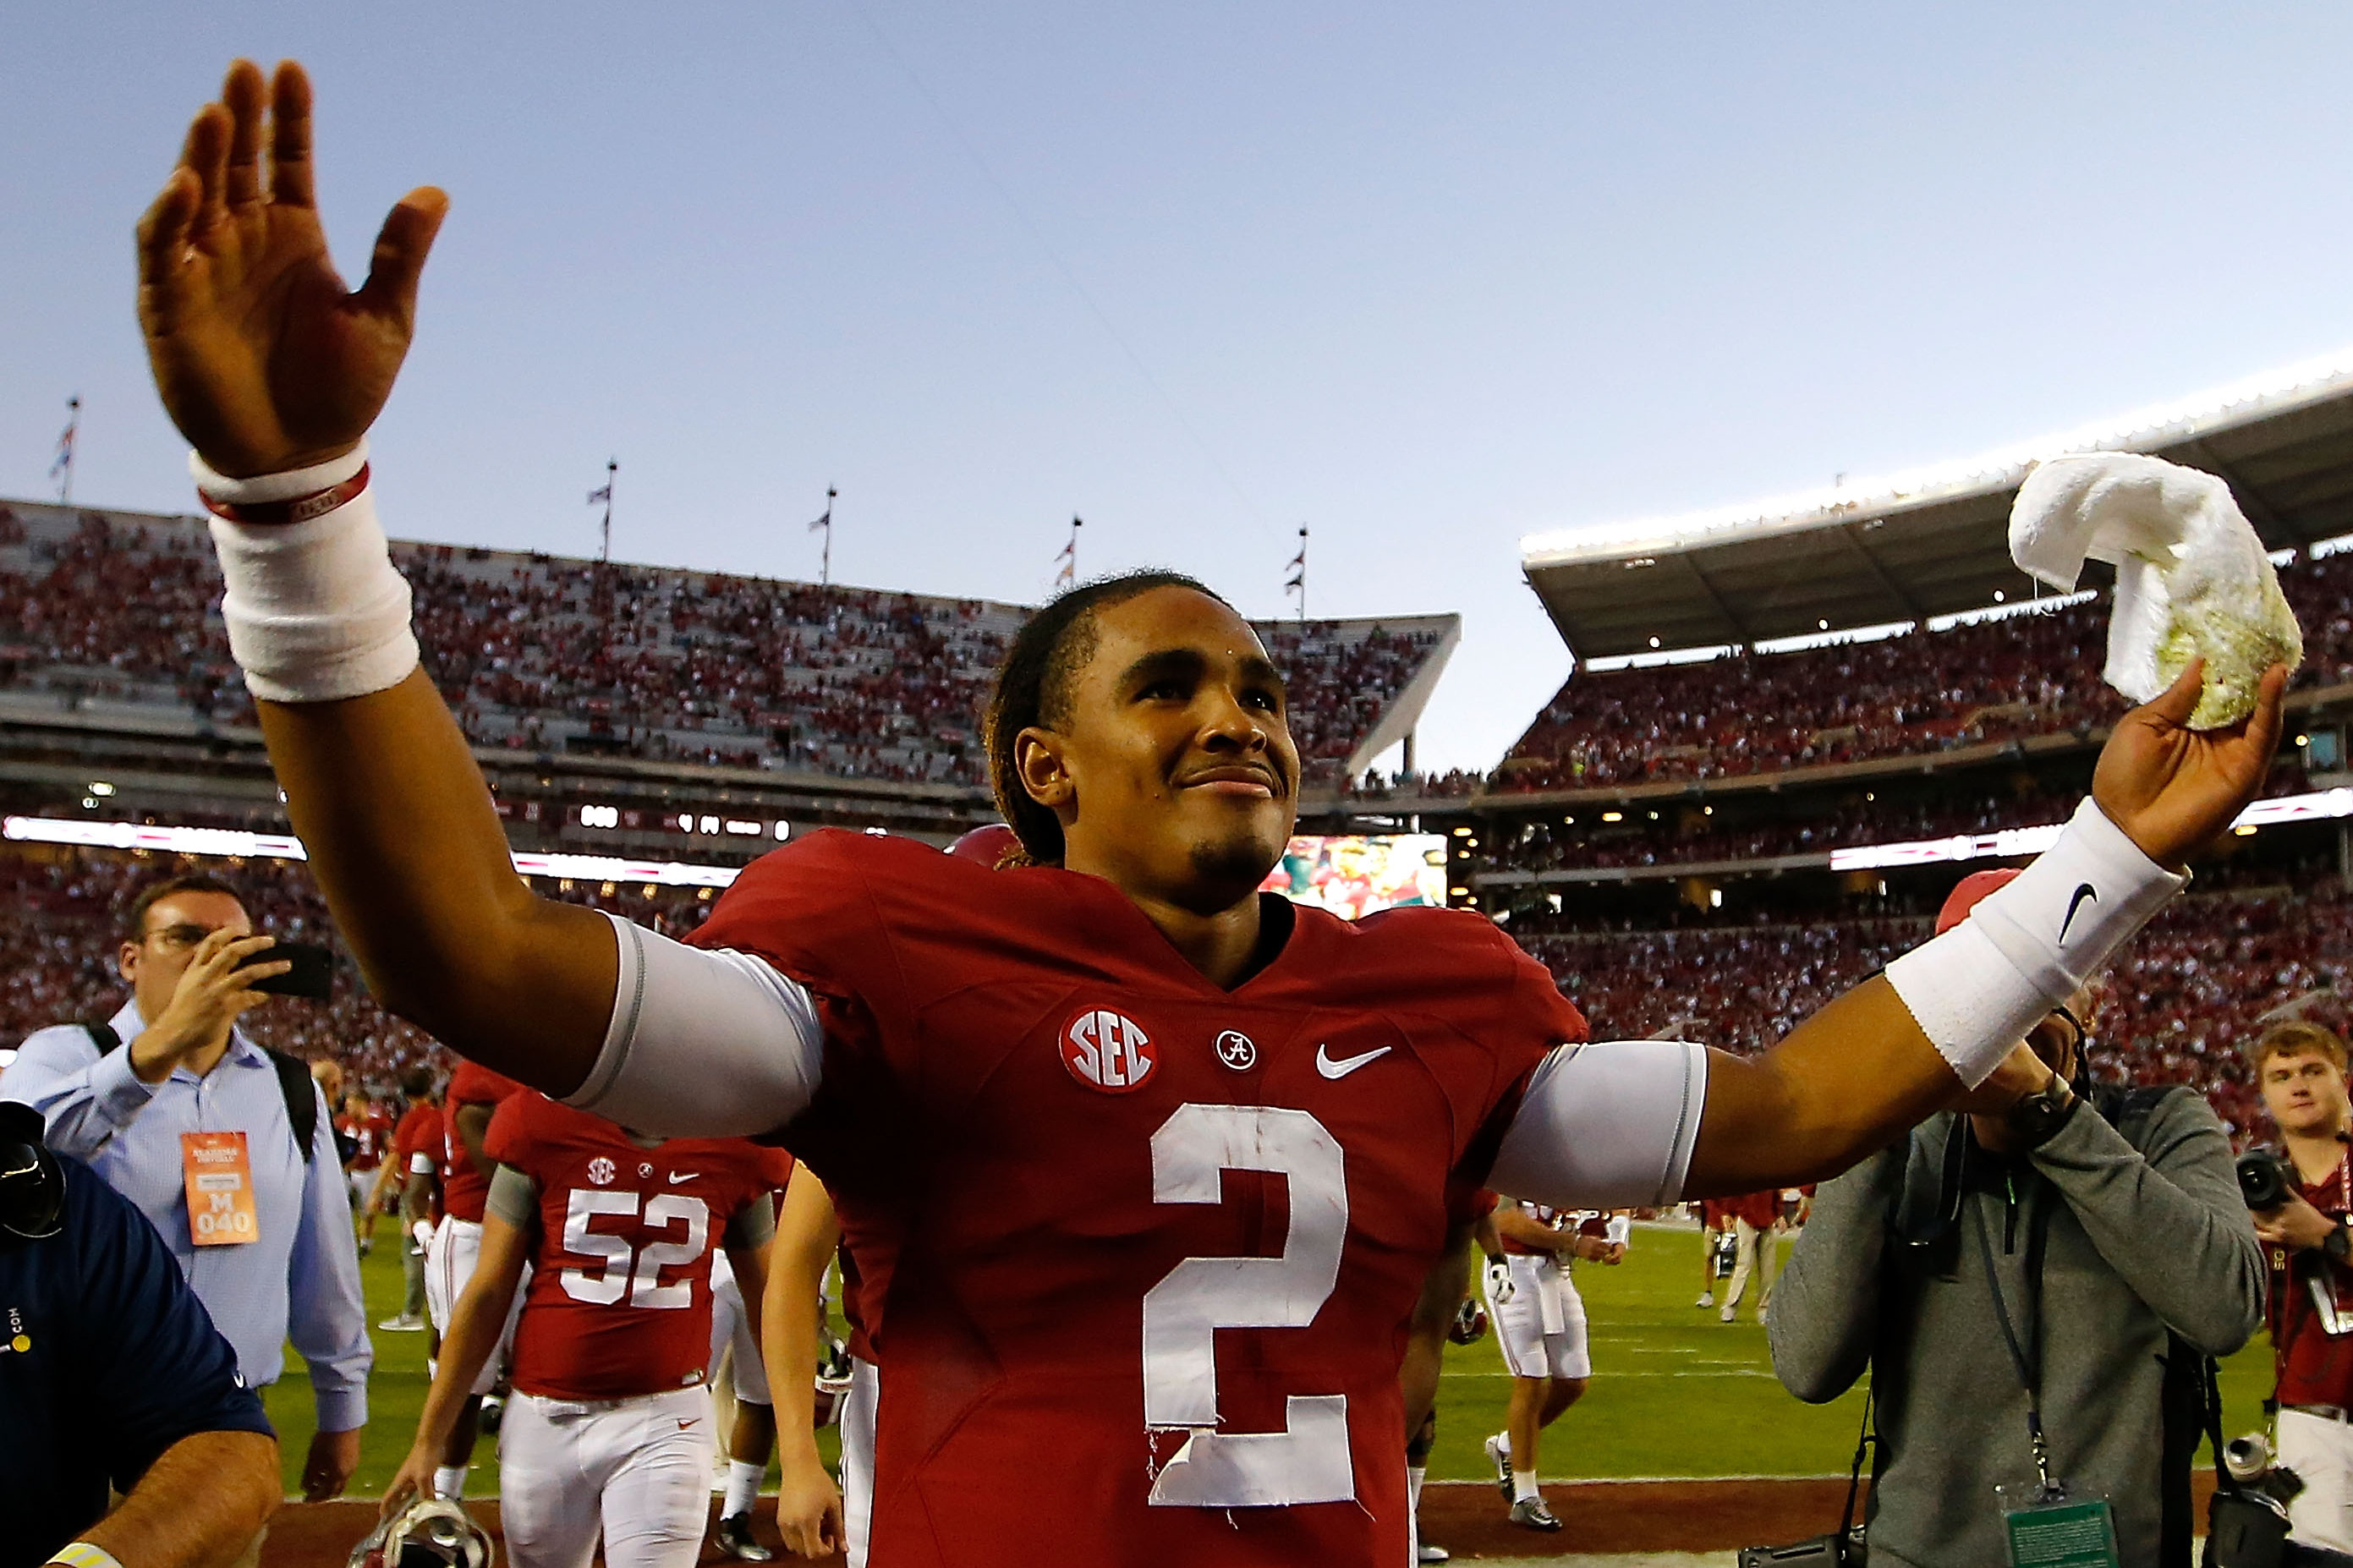 Jalen Hurts scores in Super Bowl, first Alabama player to do it